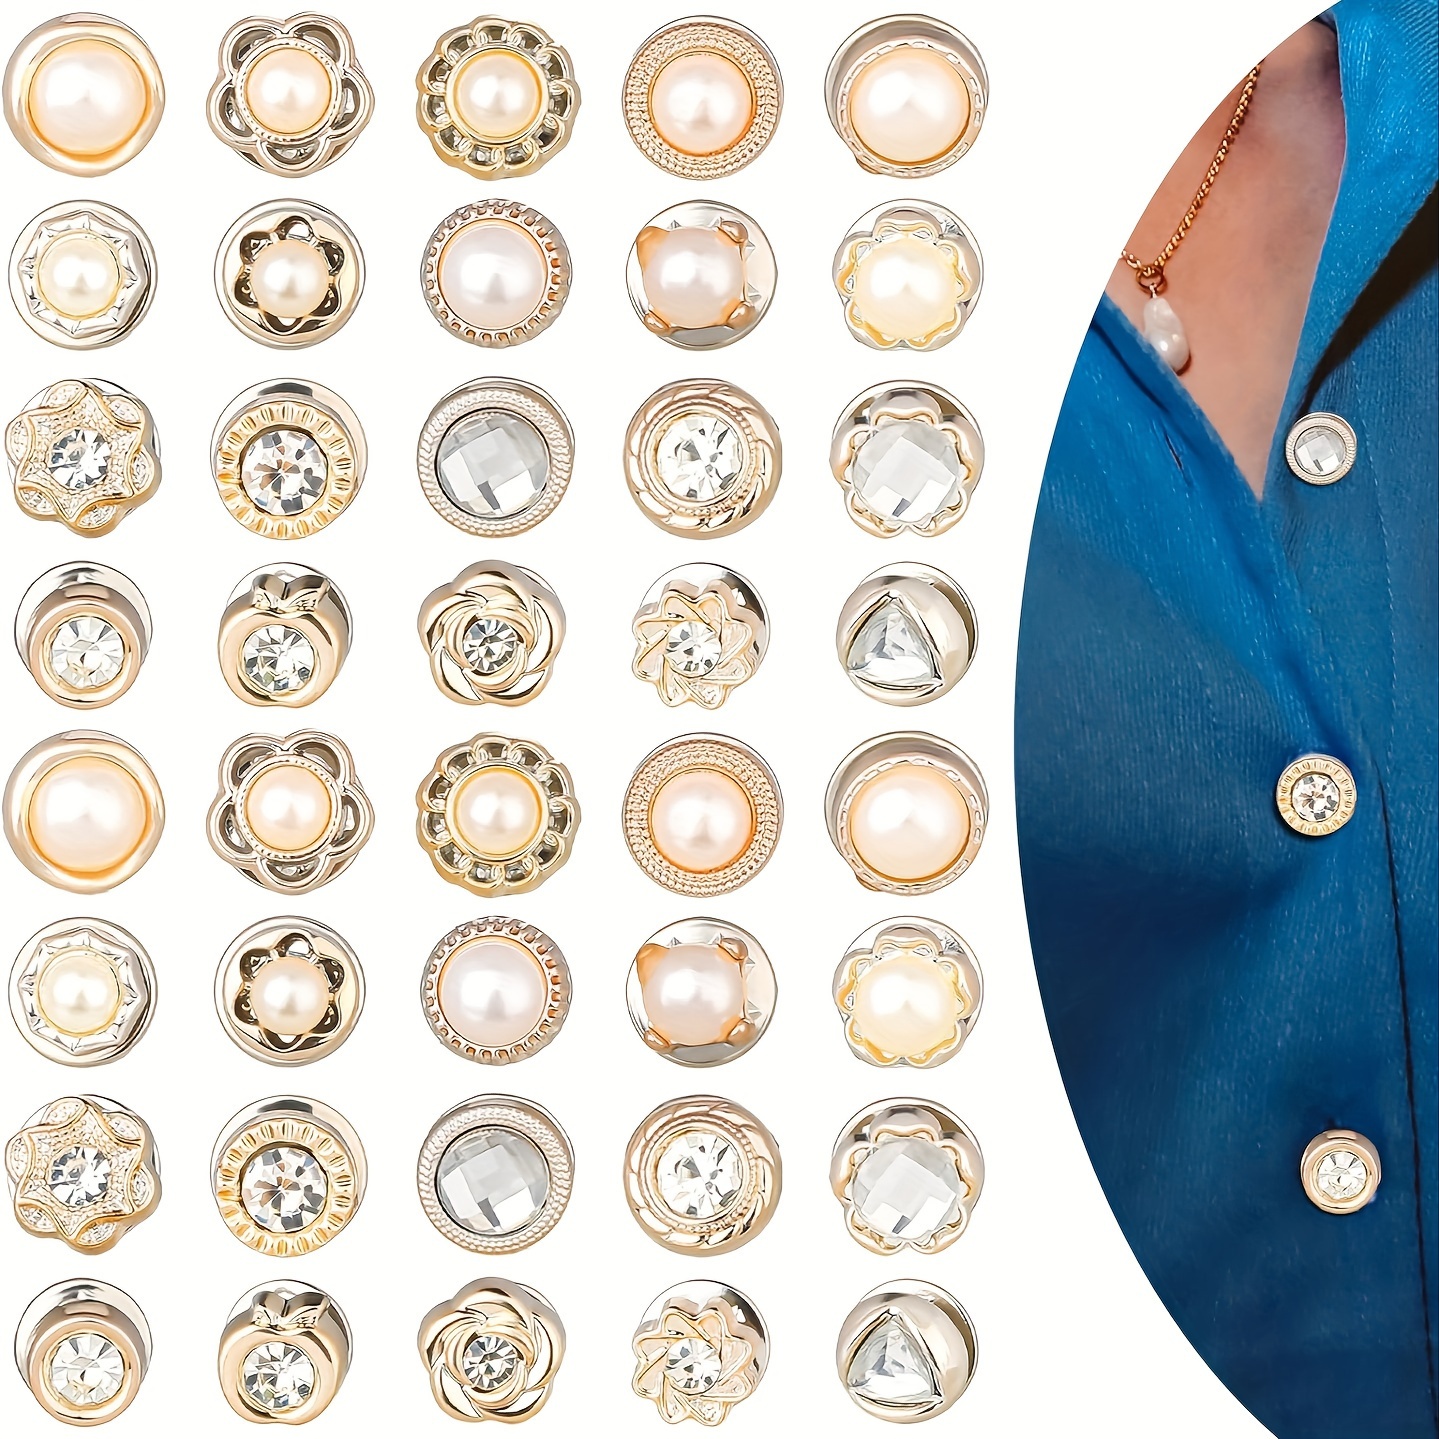 

20/40pcs Assorted Pearl And Diamond Instant Buttons Pins Set, 0.4in Chic Jeans Fasteners, No-sew Brooch Covers & Lapel Pins, Metal Decorative Accessories For Shirts, Jackets, Suits, Sweaters